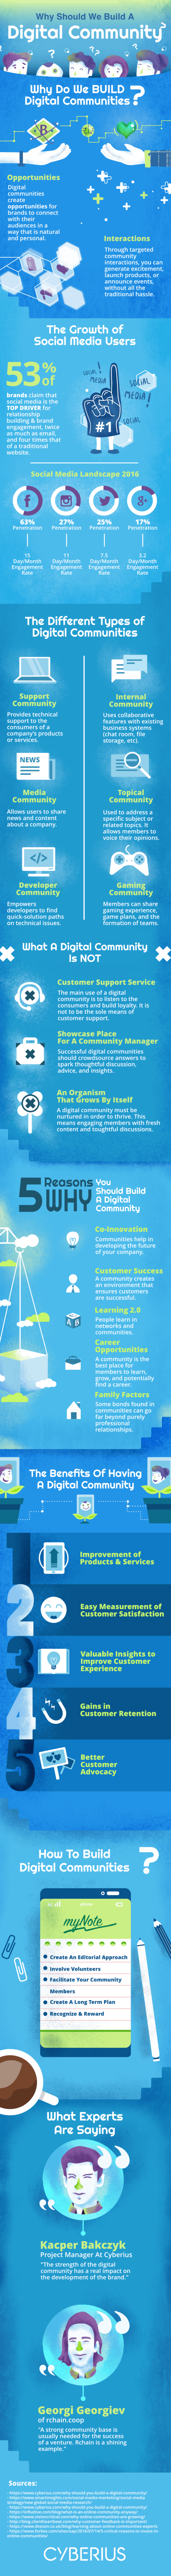 Why Should We Build A Digital Community? Infographic